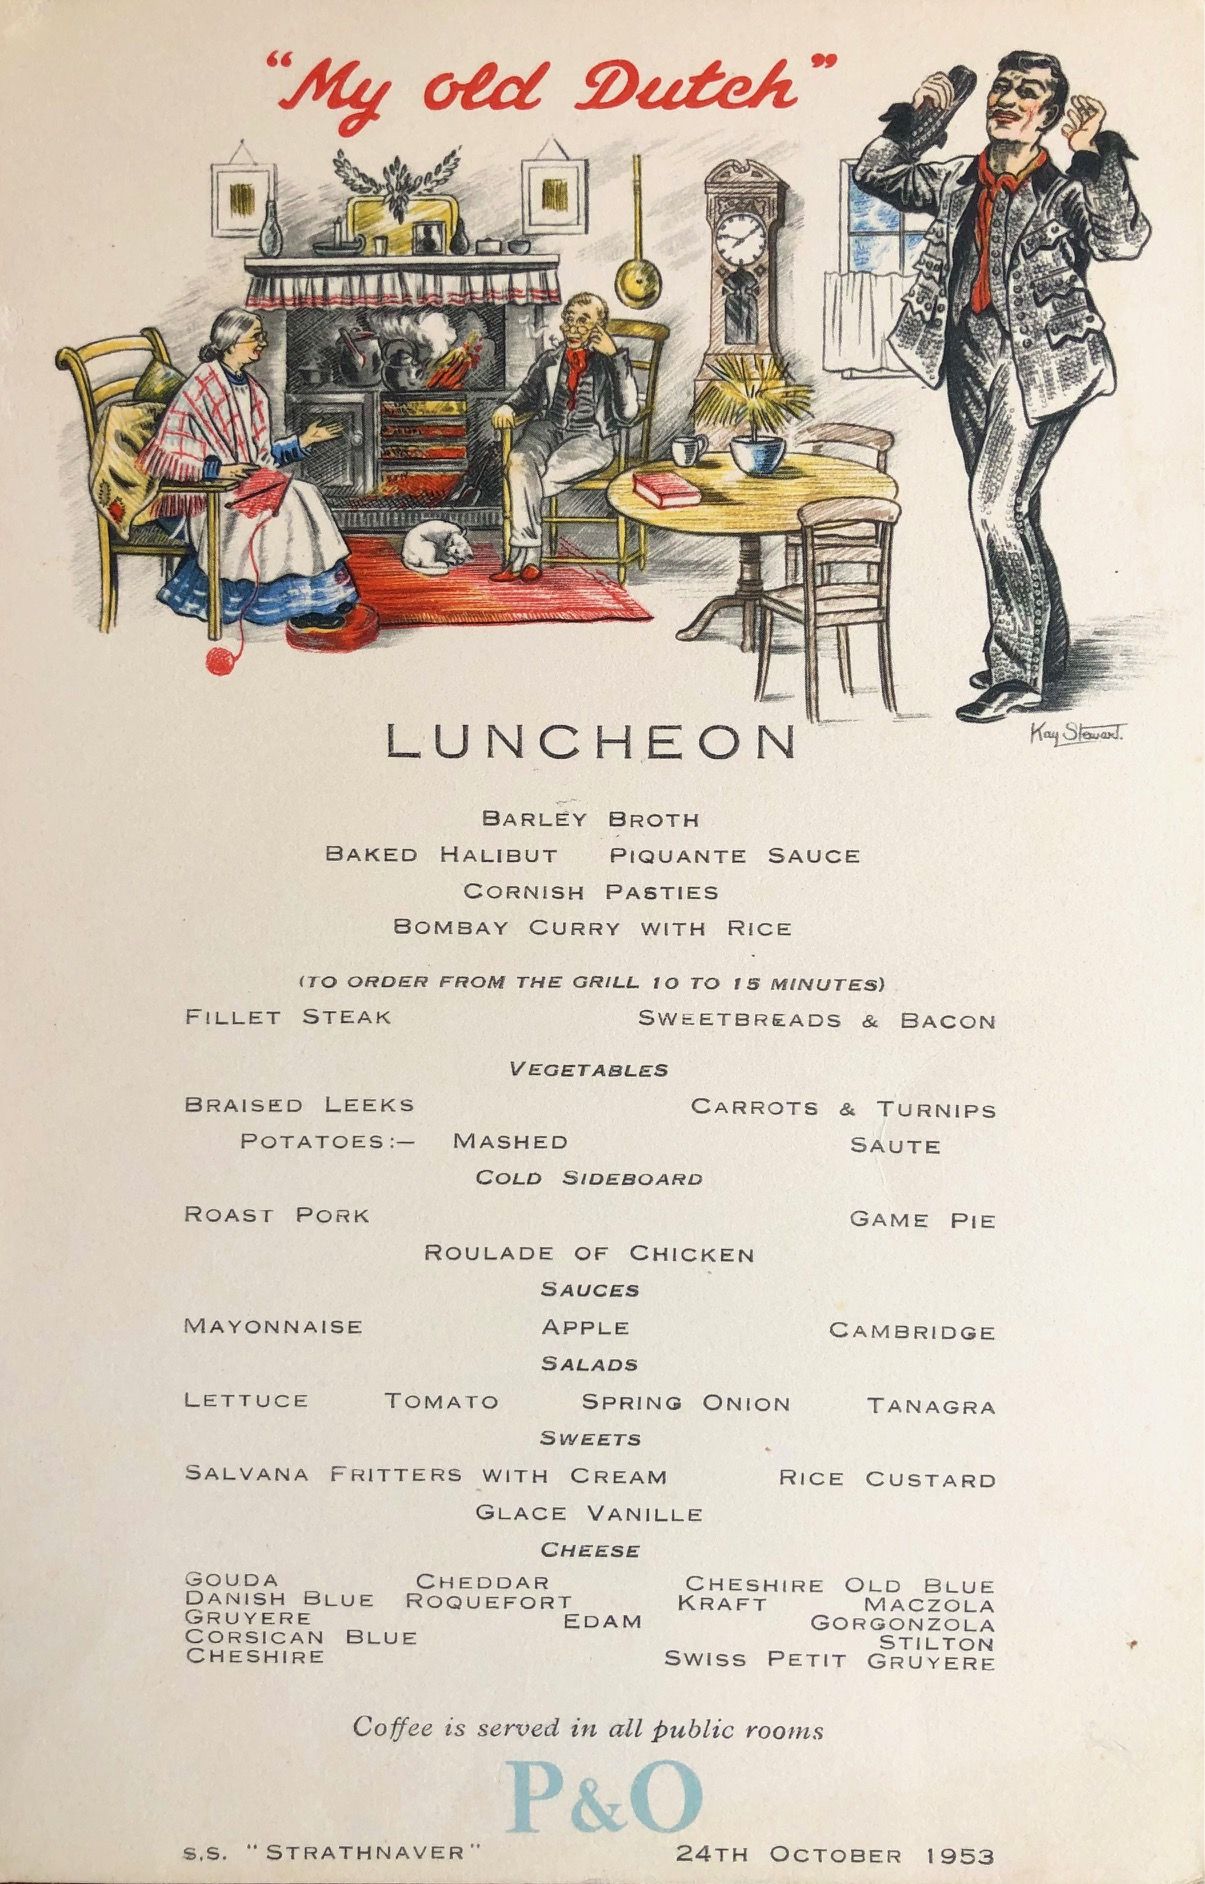 *NEW* P & O Lines. S.S. "Strathnaver" Luncheon Menu - My Old Dutch